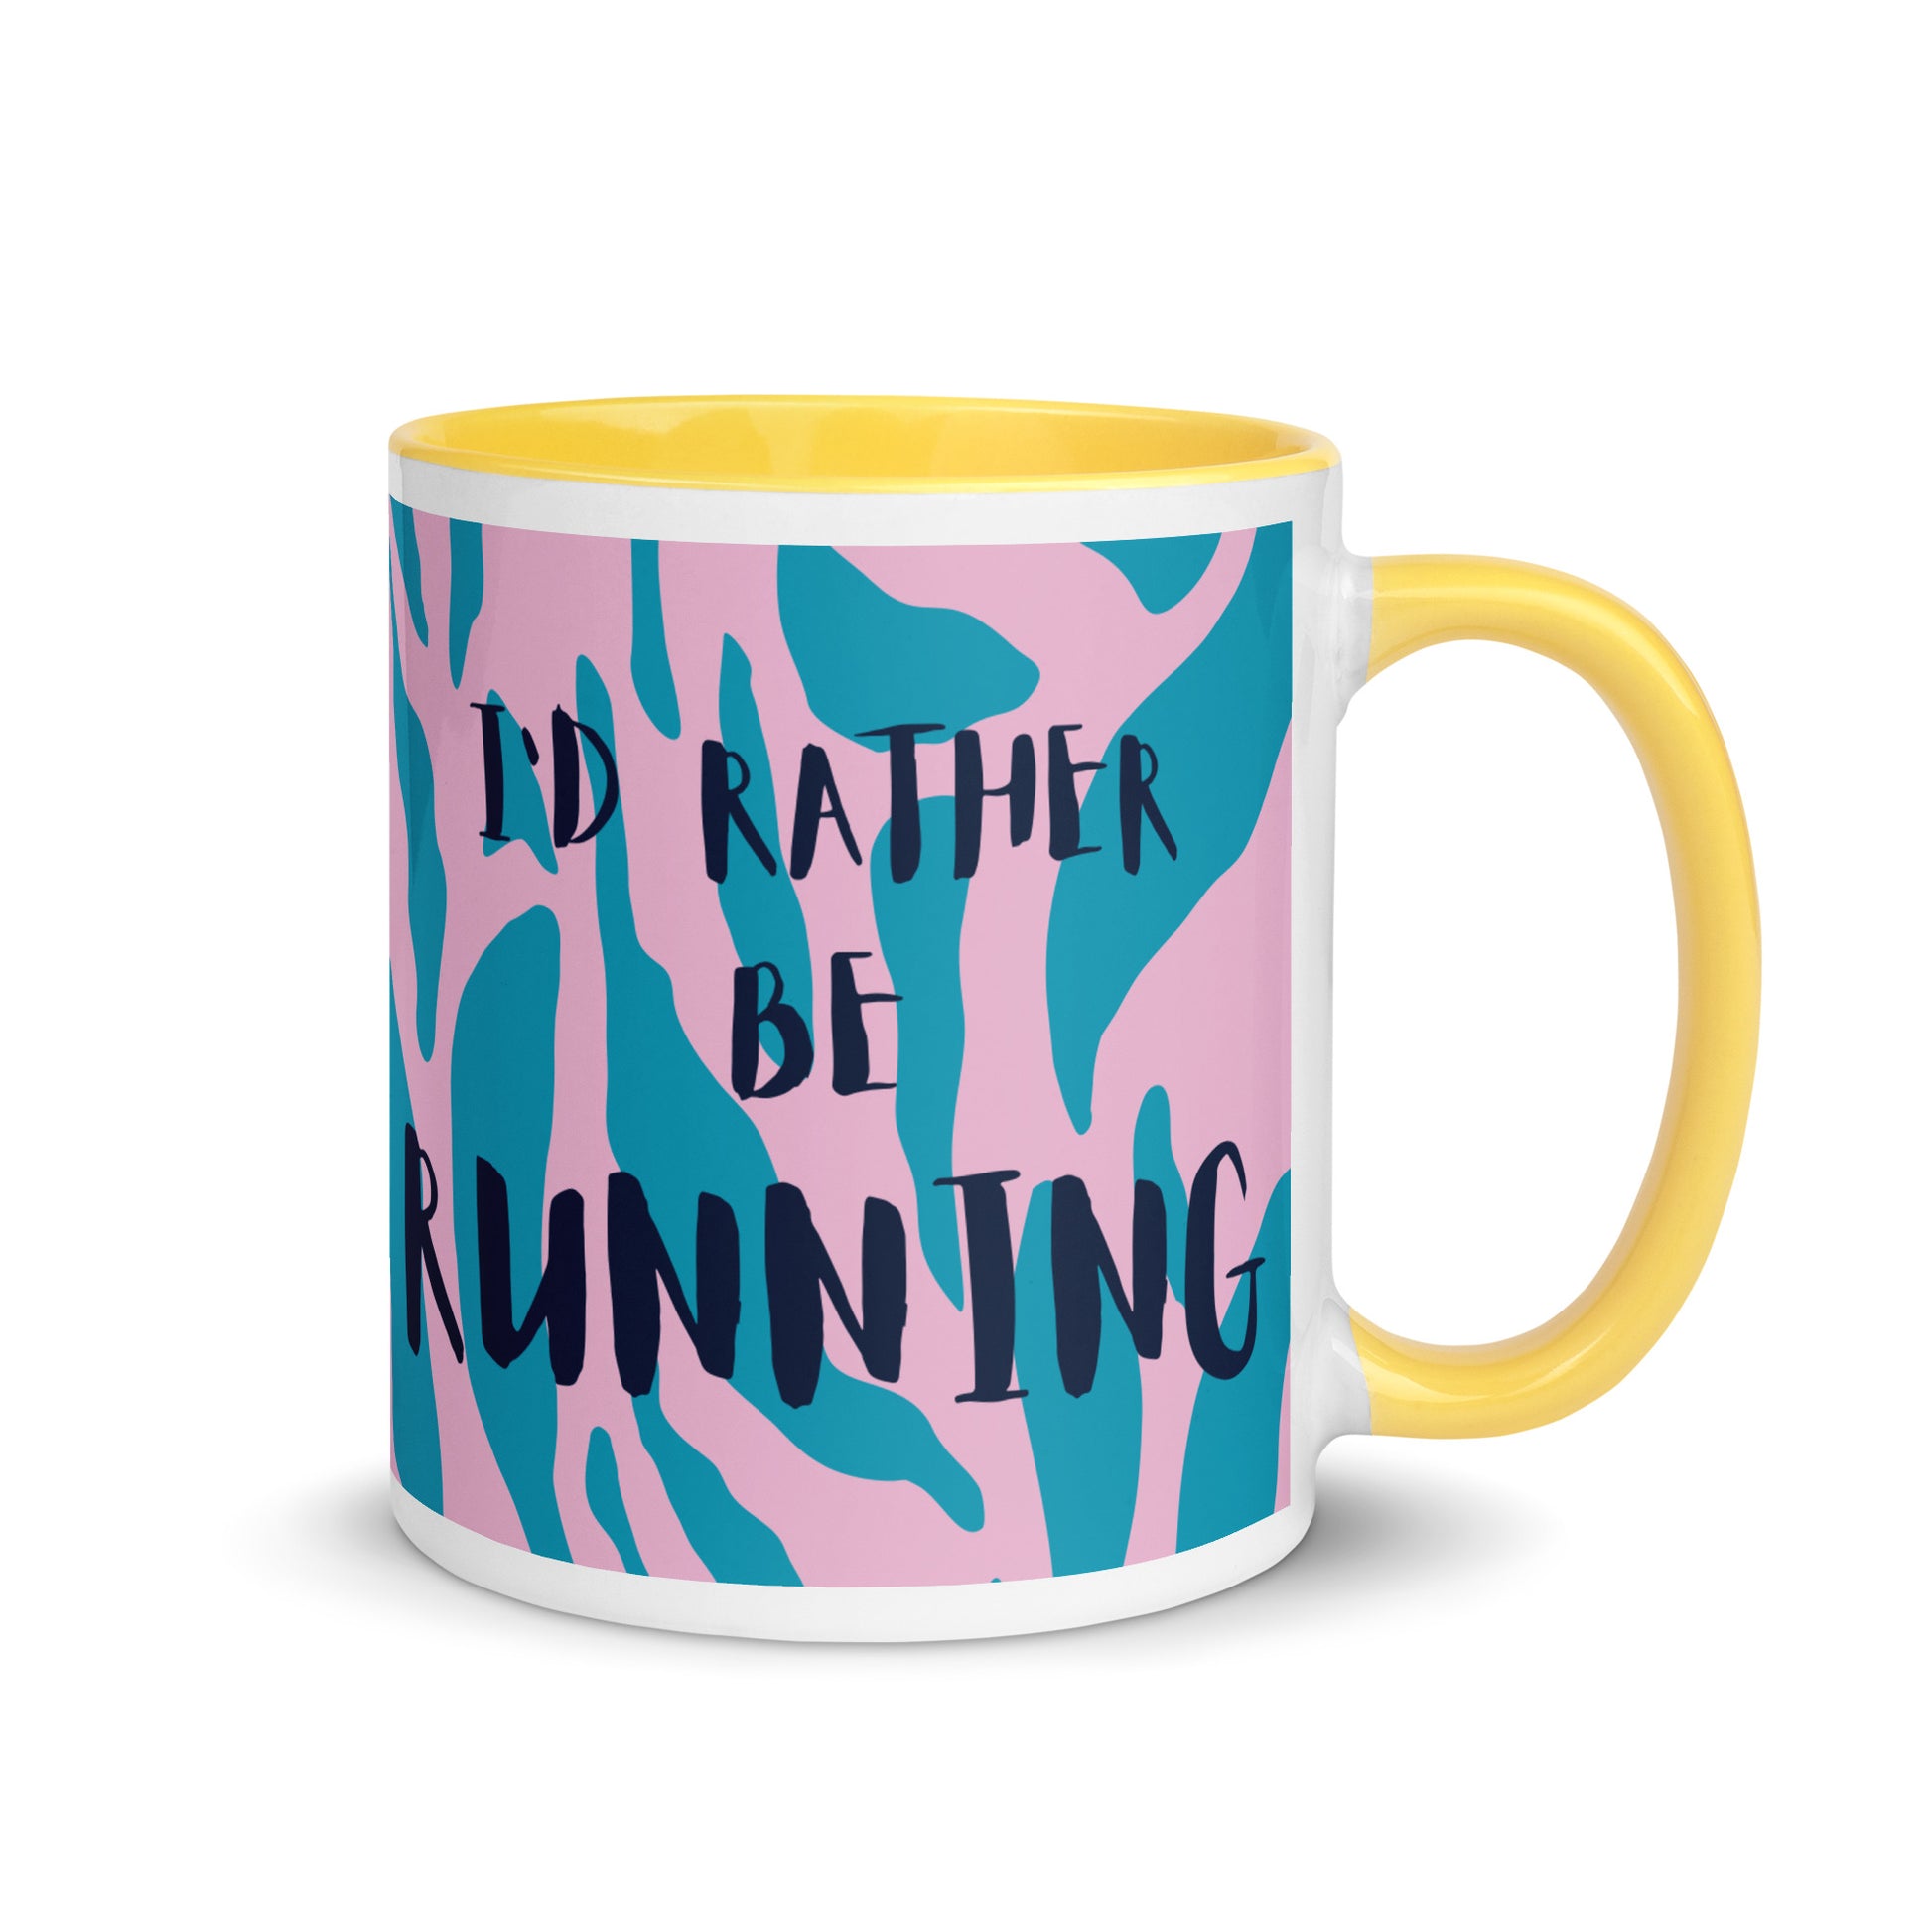 yellow handled mug with a pink and blue animal print design and the phrase I'd rather be running in a black font. the perfect gift for a runner